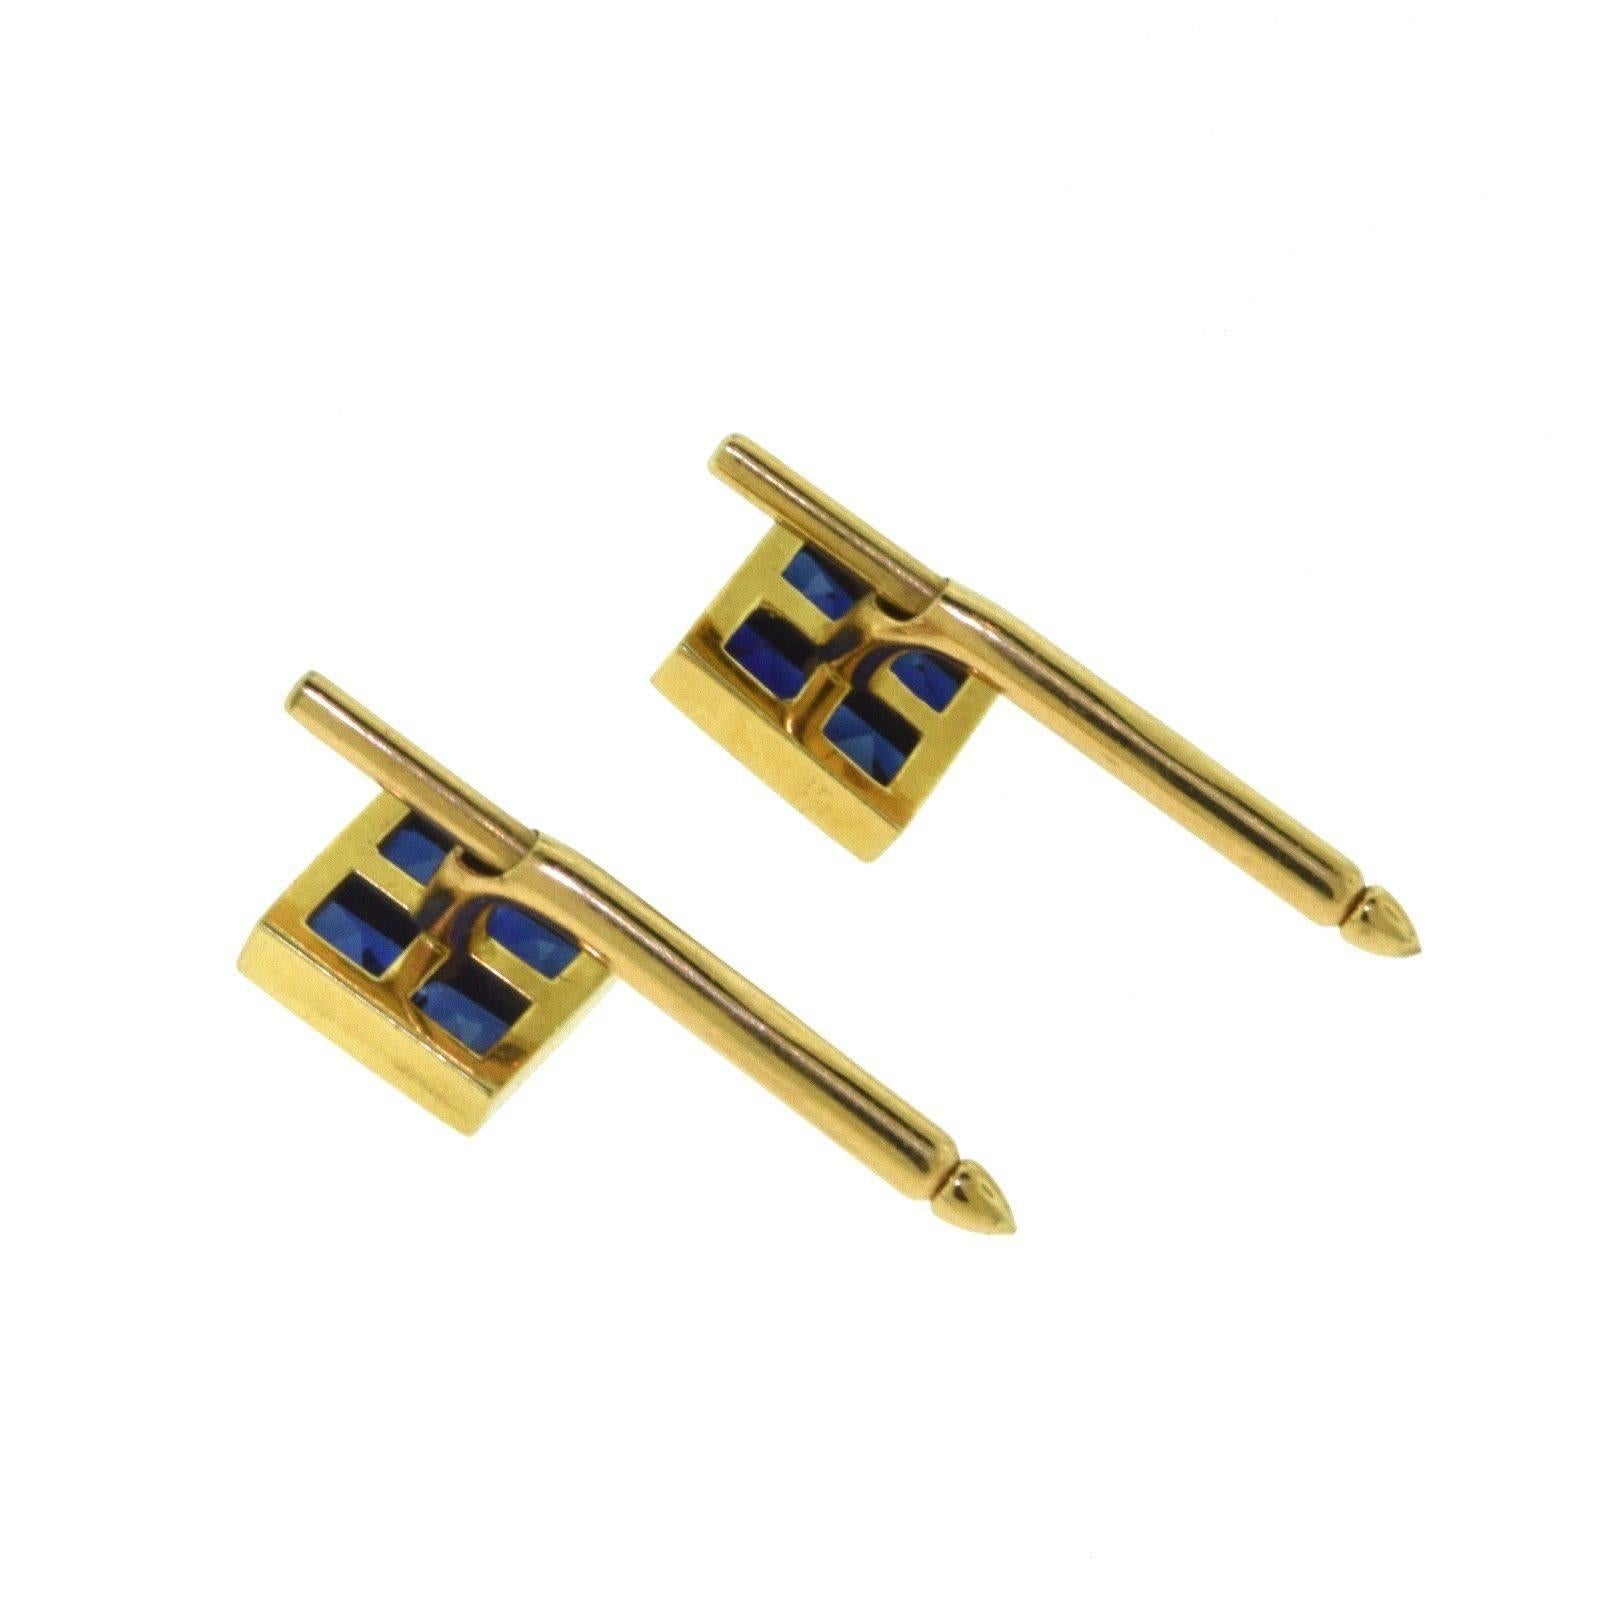 Beautiful sapphires set in 18K yellow gold bar cufflinks and 2 stud set by Van Cleef & Arpels, circa 1970s. They feature gorgeous sapphires and the bars can be removed to fit other bars of different materials if available. Expertly made with great